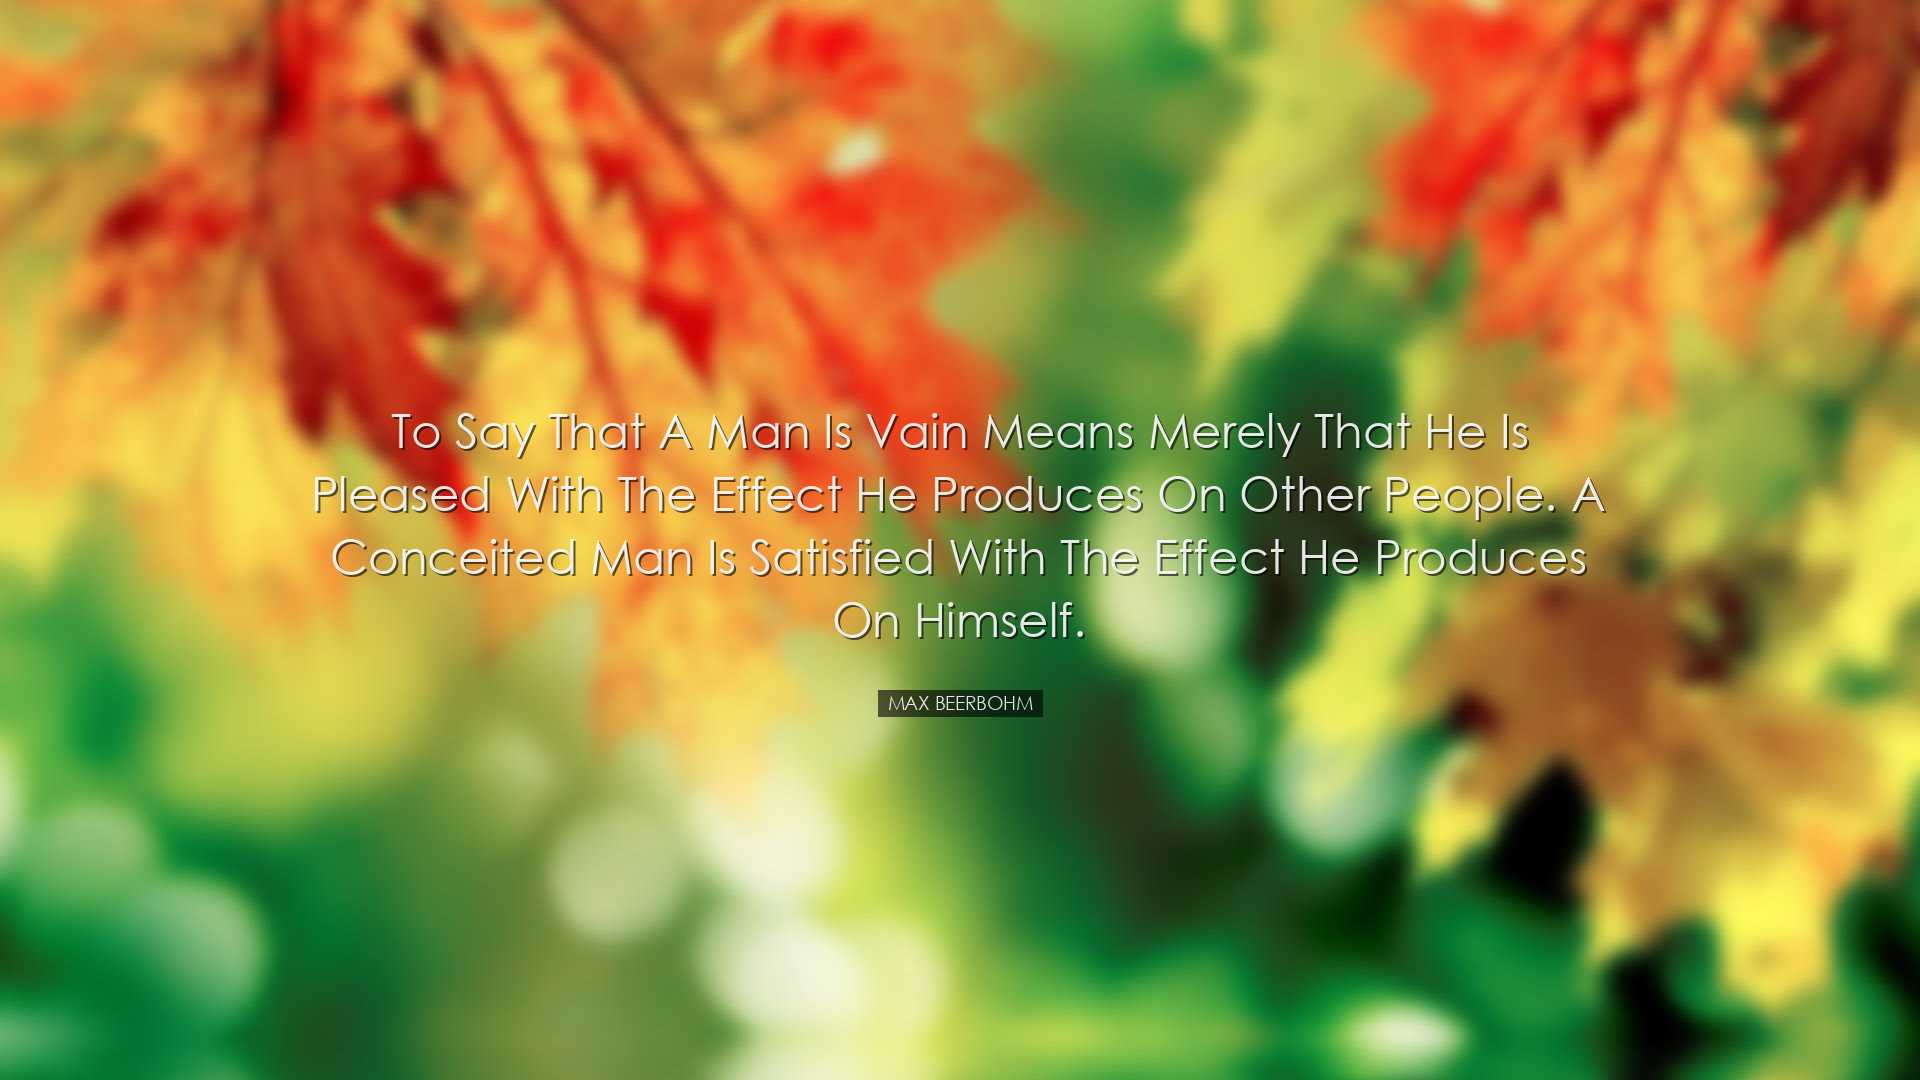 To say that a man is vain means merely that he is pleased with the